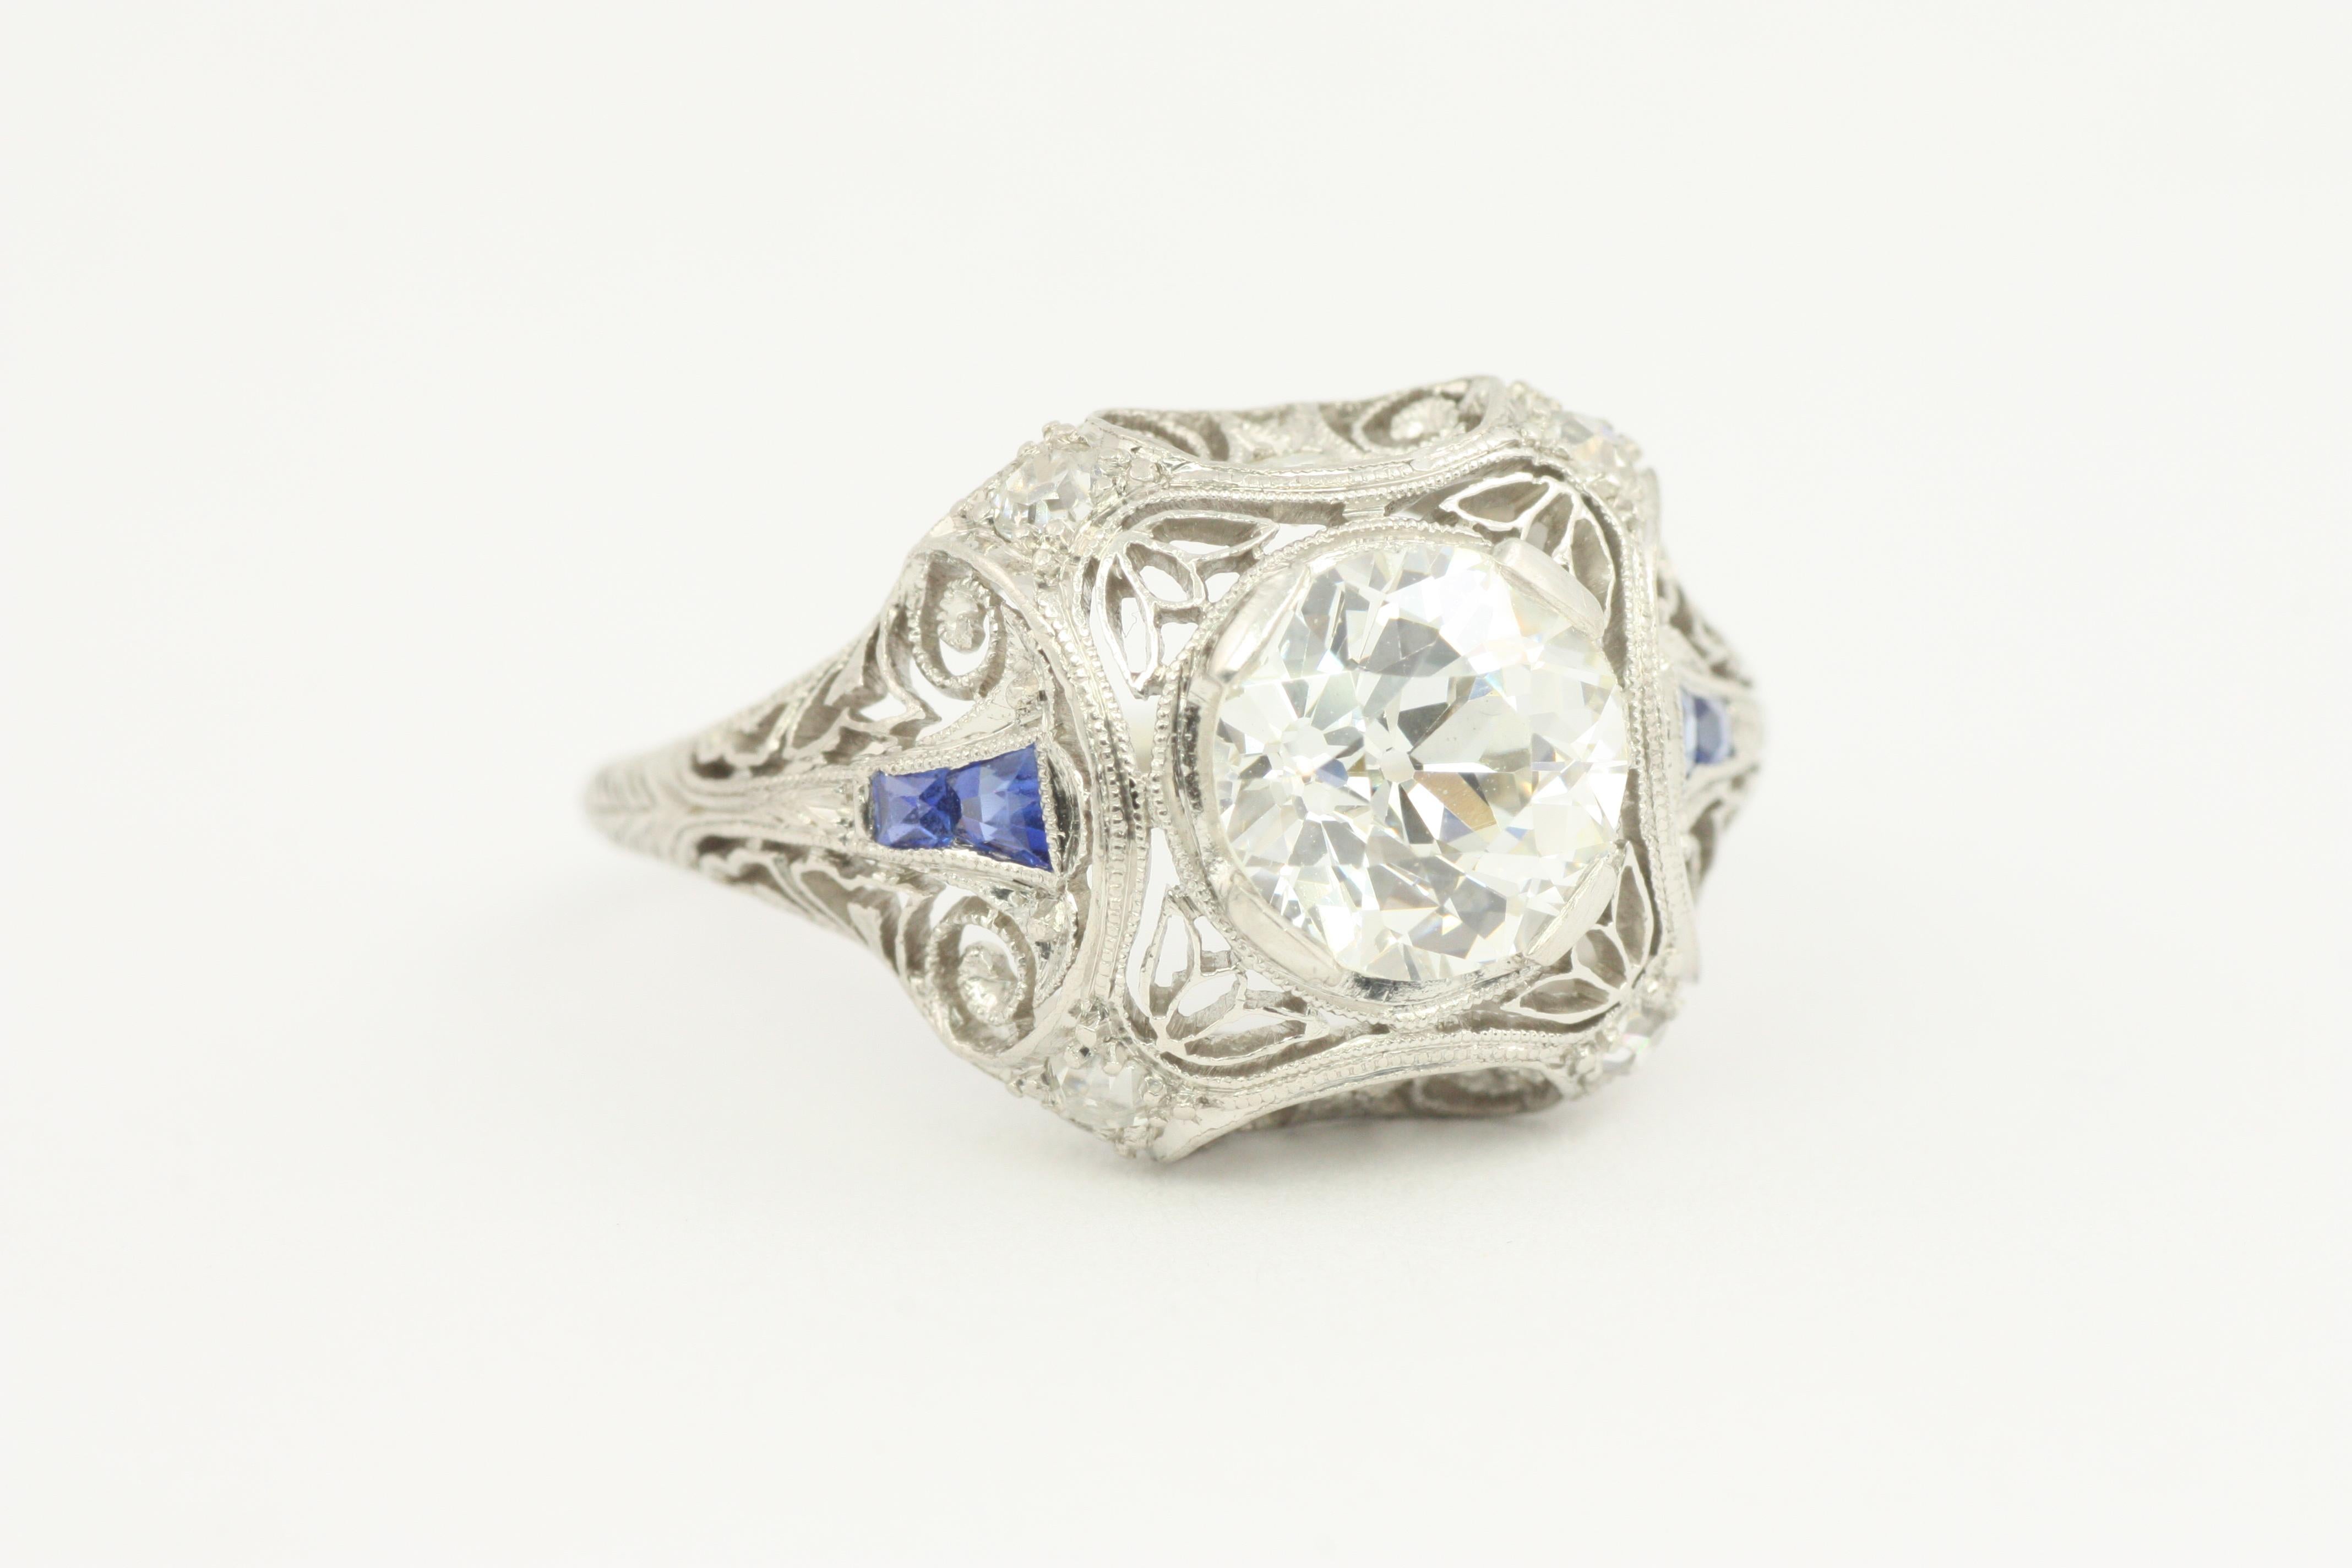 1.56 Carat Total Diamond/Sapphire Vintage Filigree Art Deco Engagement Ring 1925 In Excellent Condition For Sale In Venice, CA